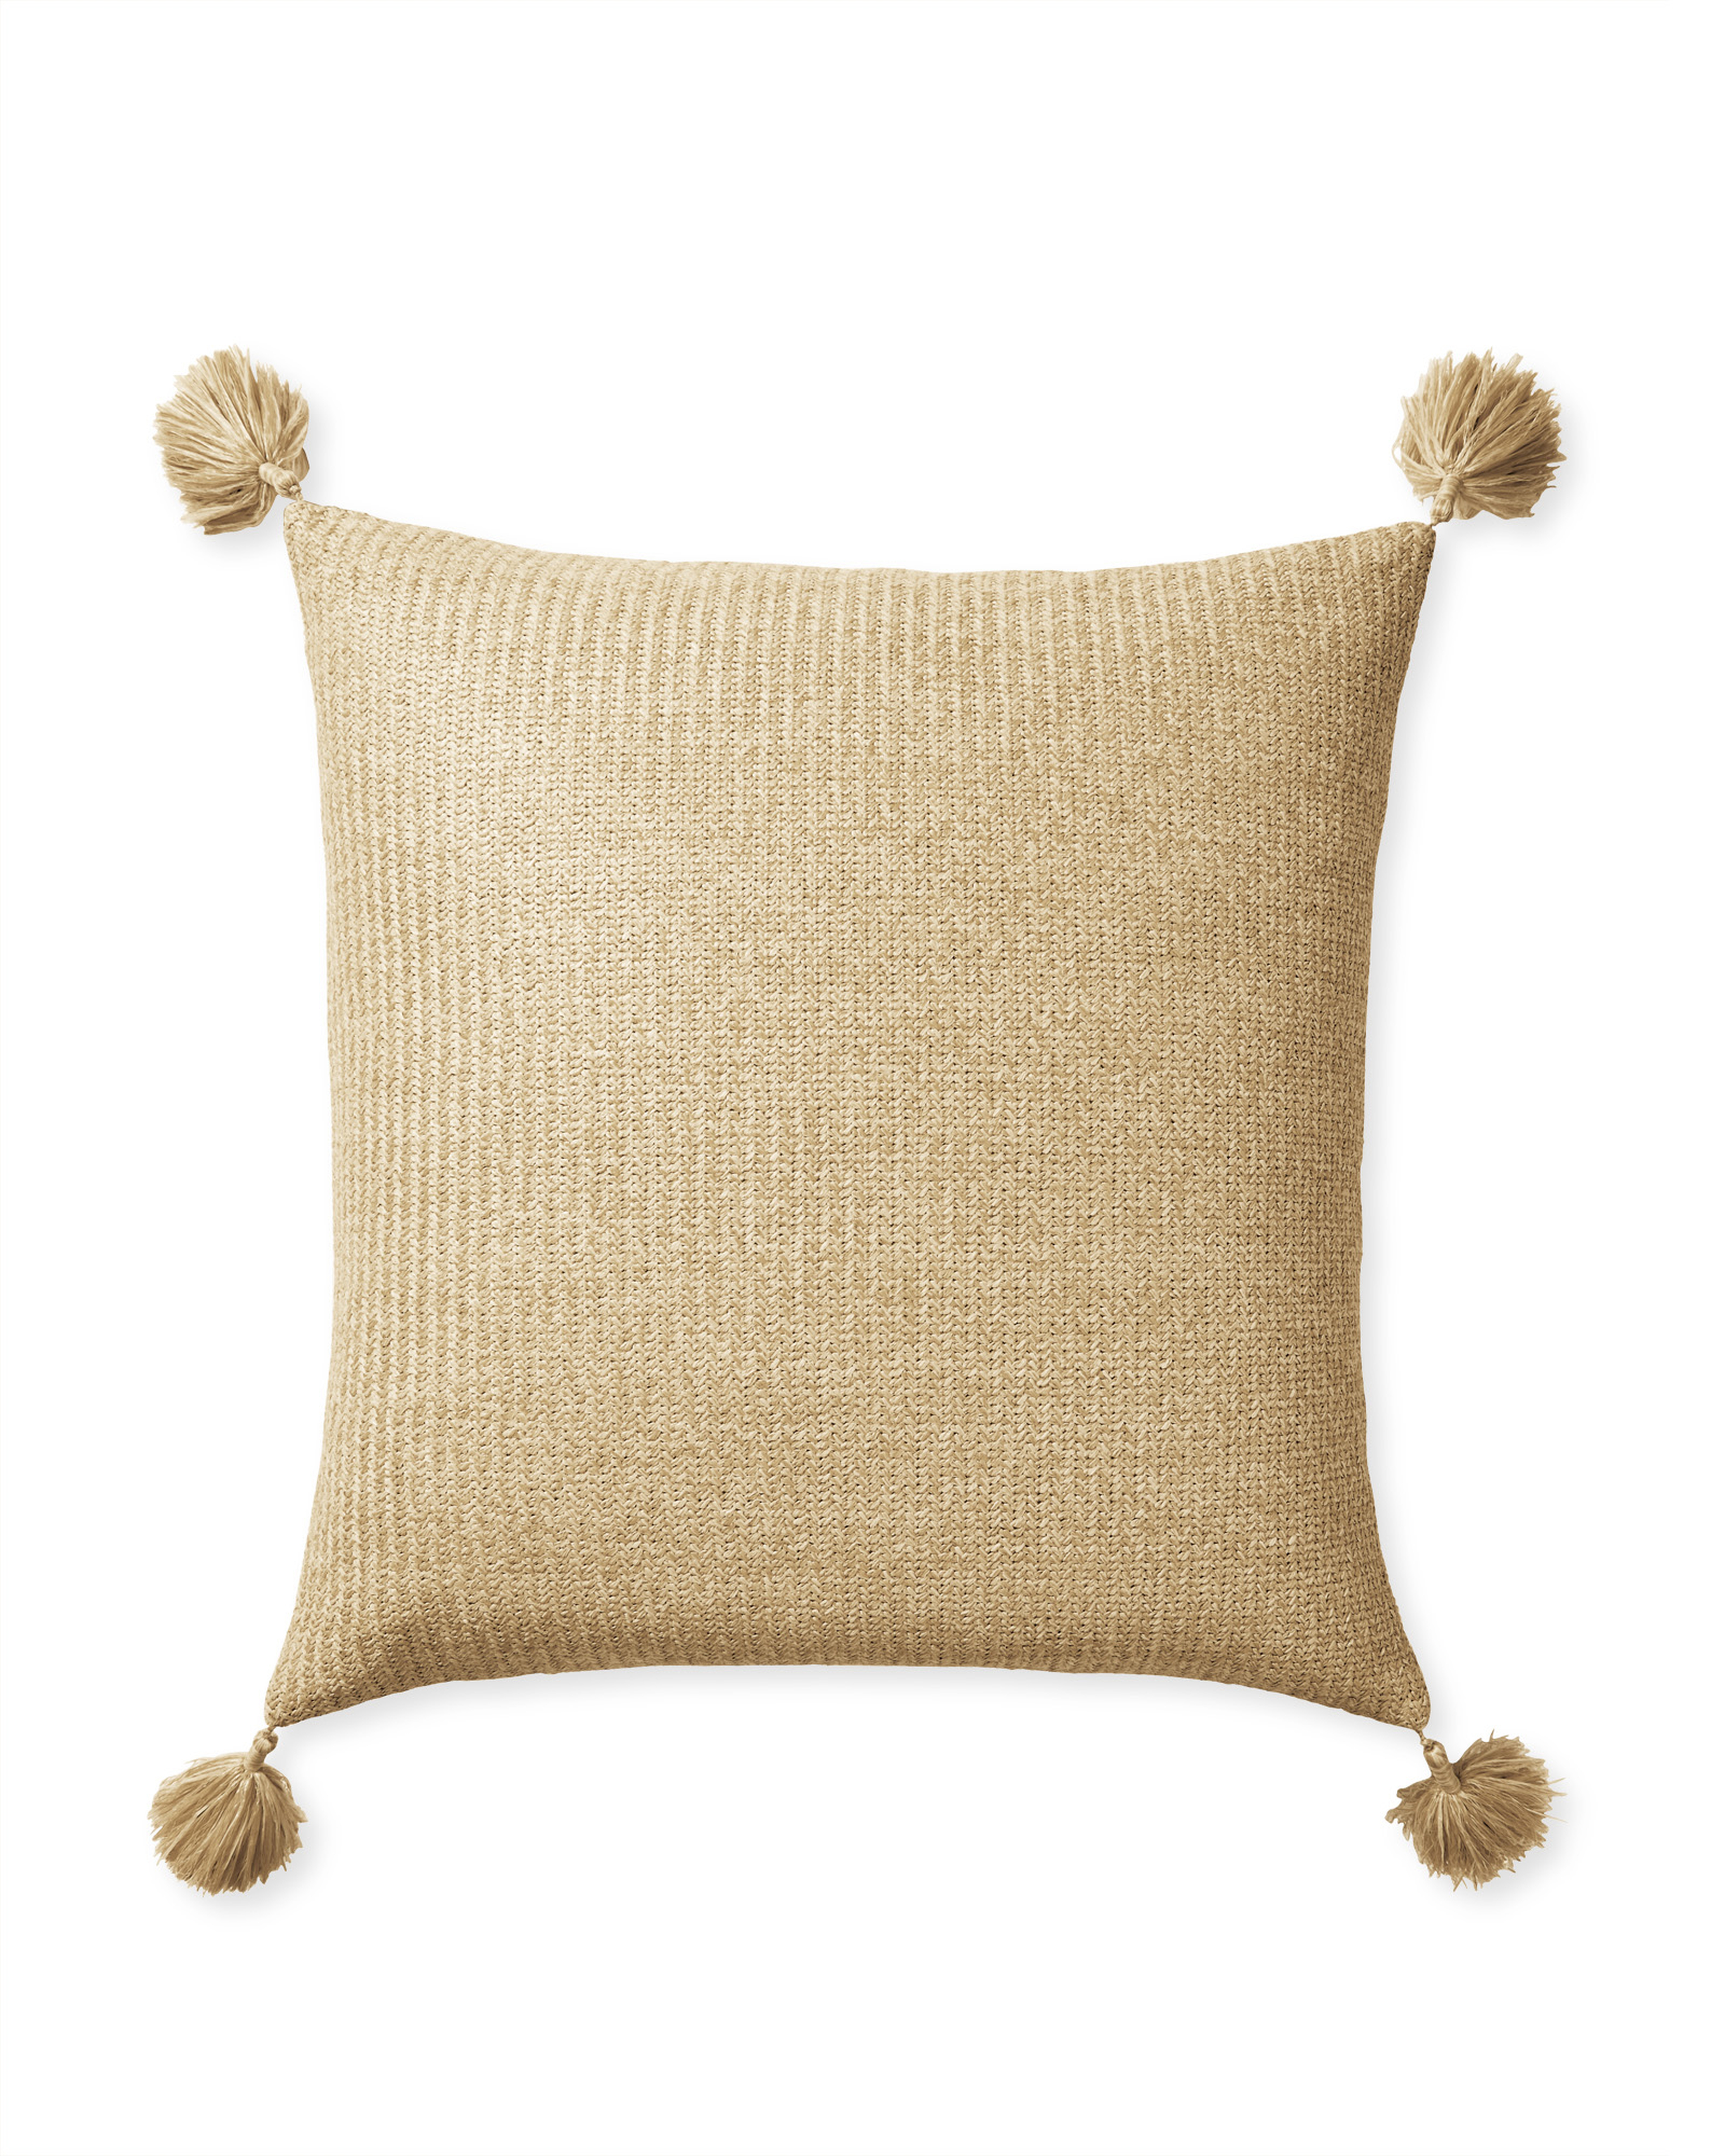 Santa Cruz Outdoor 24"SQ Pillow Cover - Insert sold separately - Serena and Lily